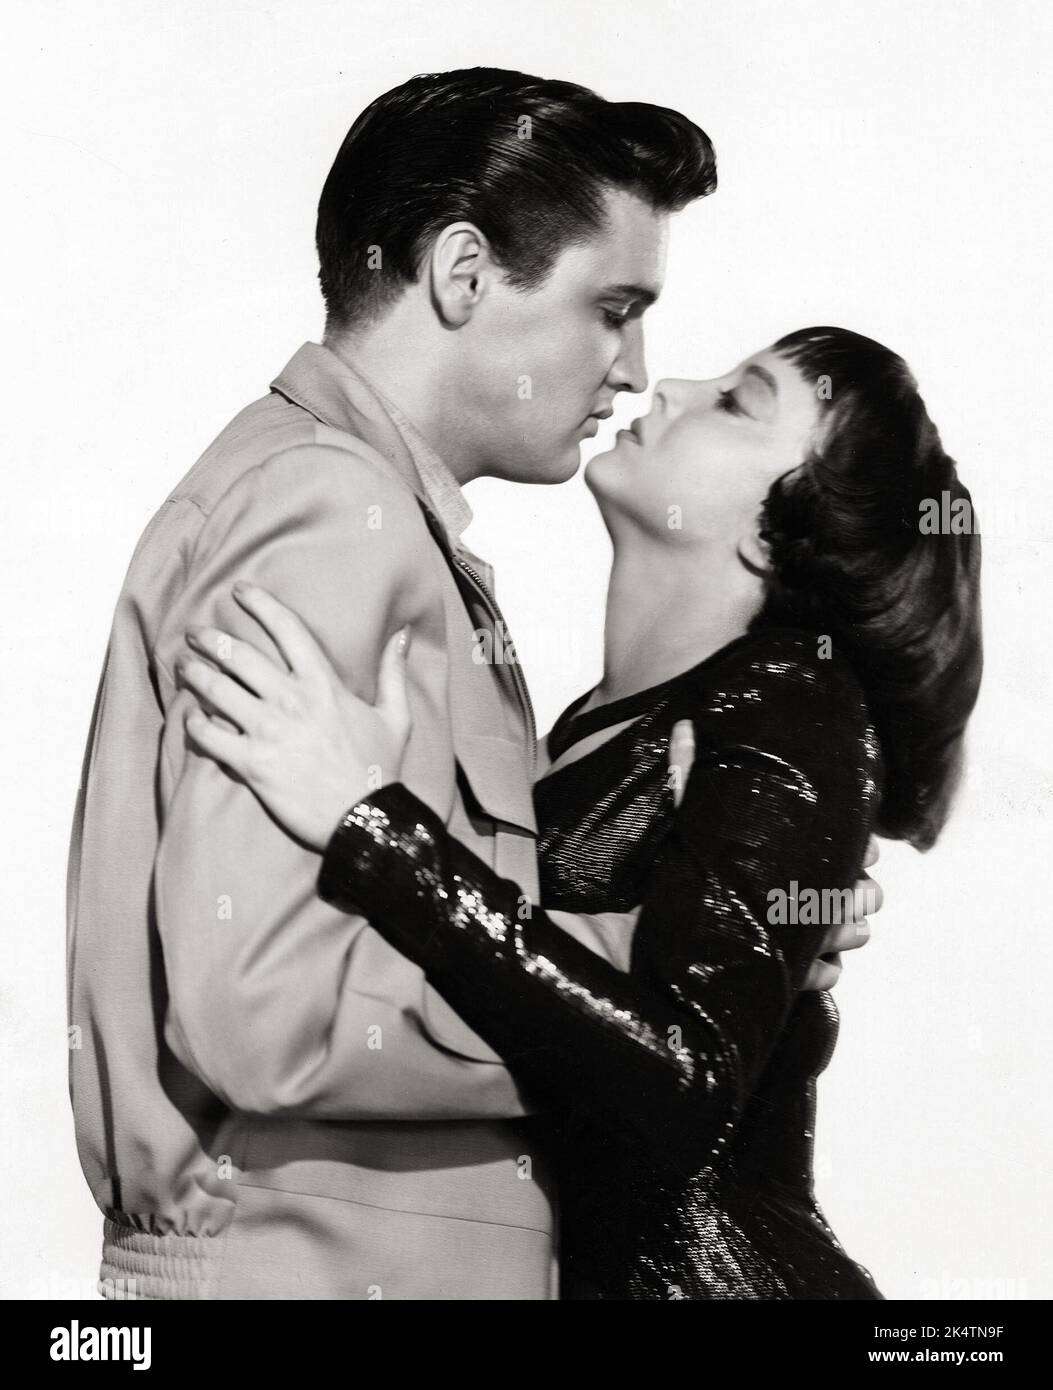 Elvis Presley and Caroline Jones in 'King Creole' (Paramount, 1958) publicity still black and white. Stock Photo